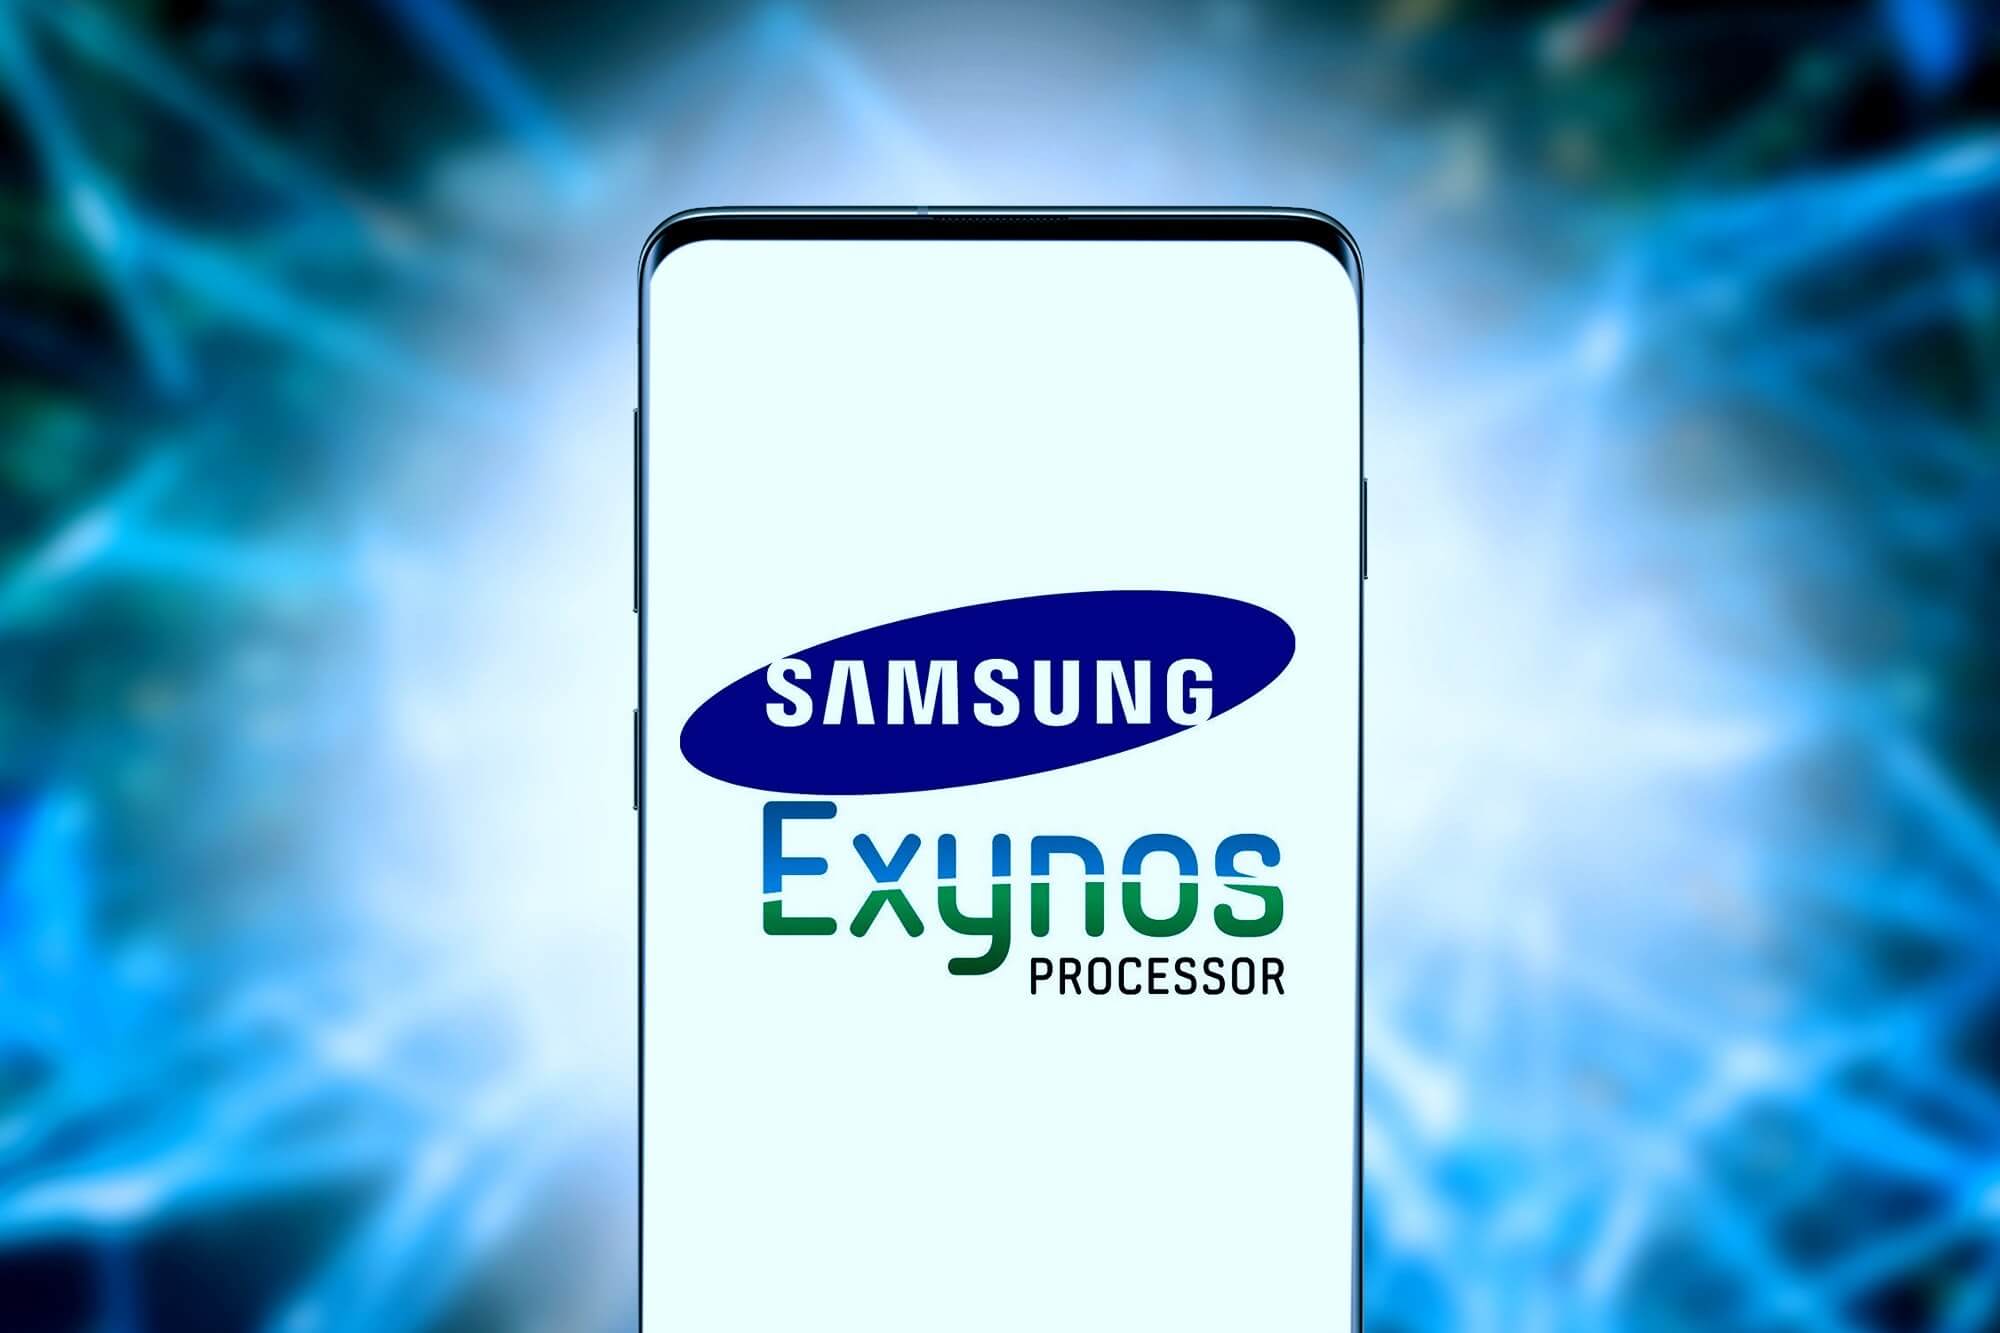 The Exynos version of the Samsung Galaxy S20 Ultra is being hammered with complaints